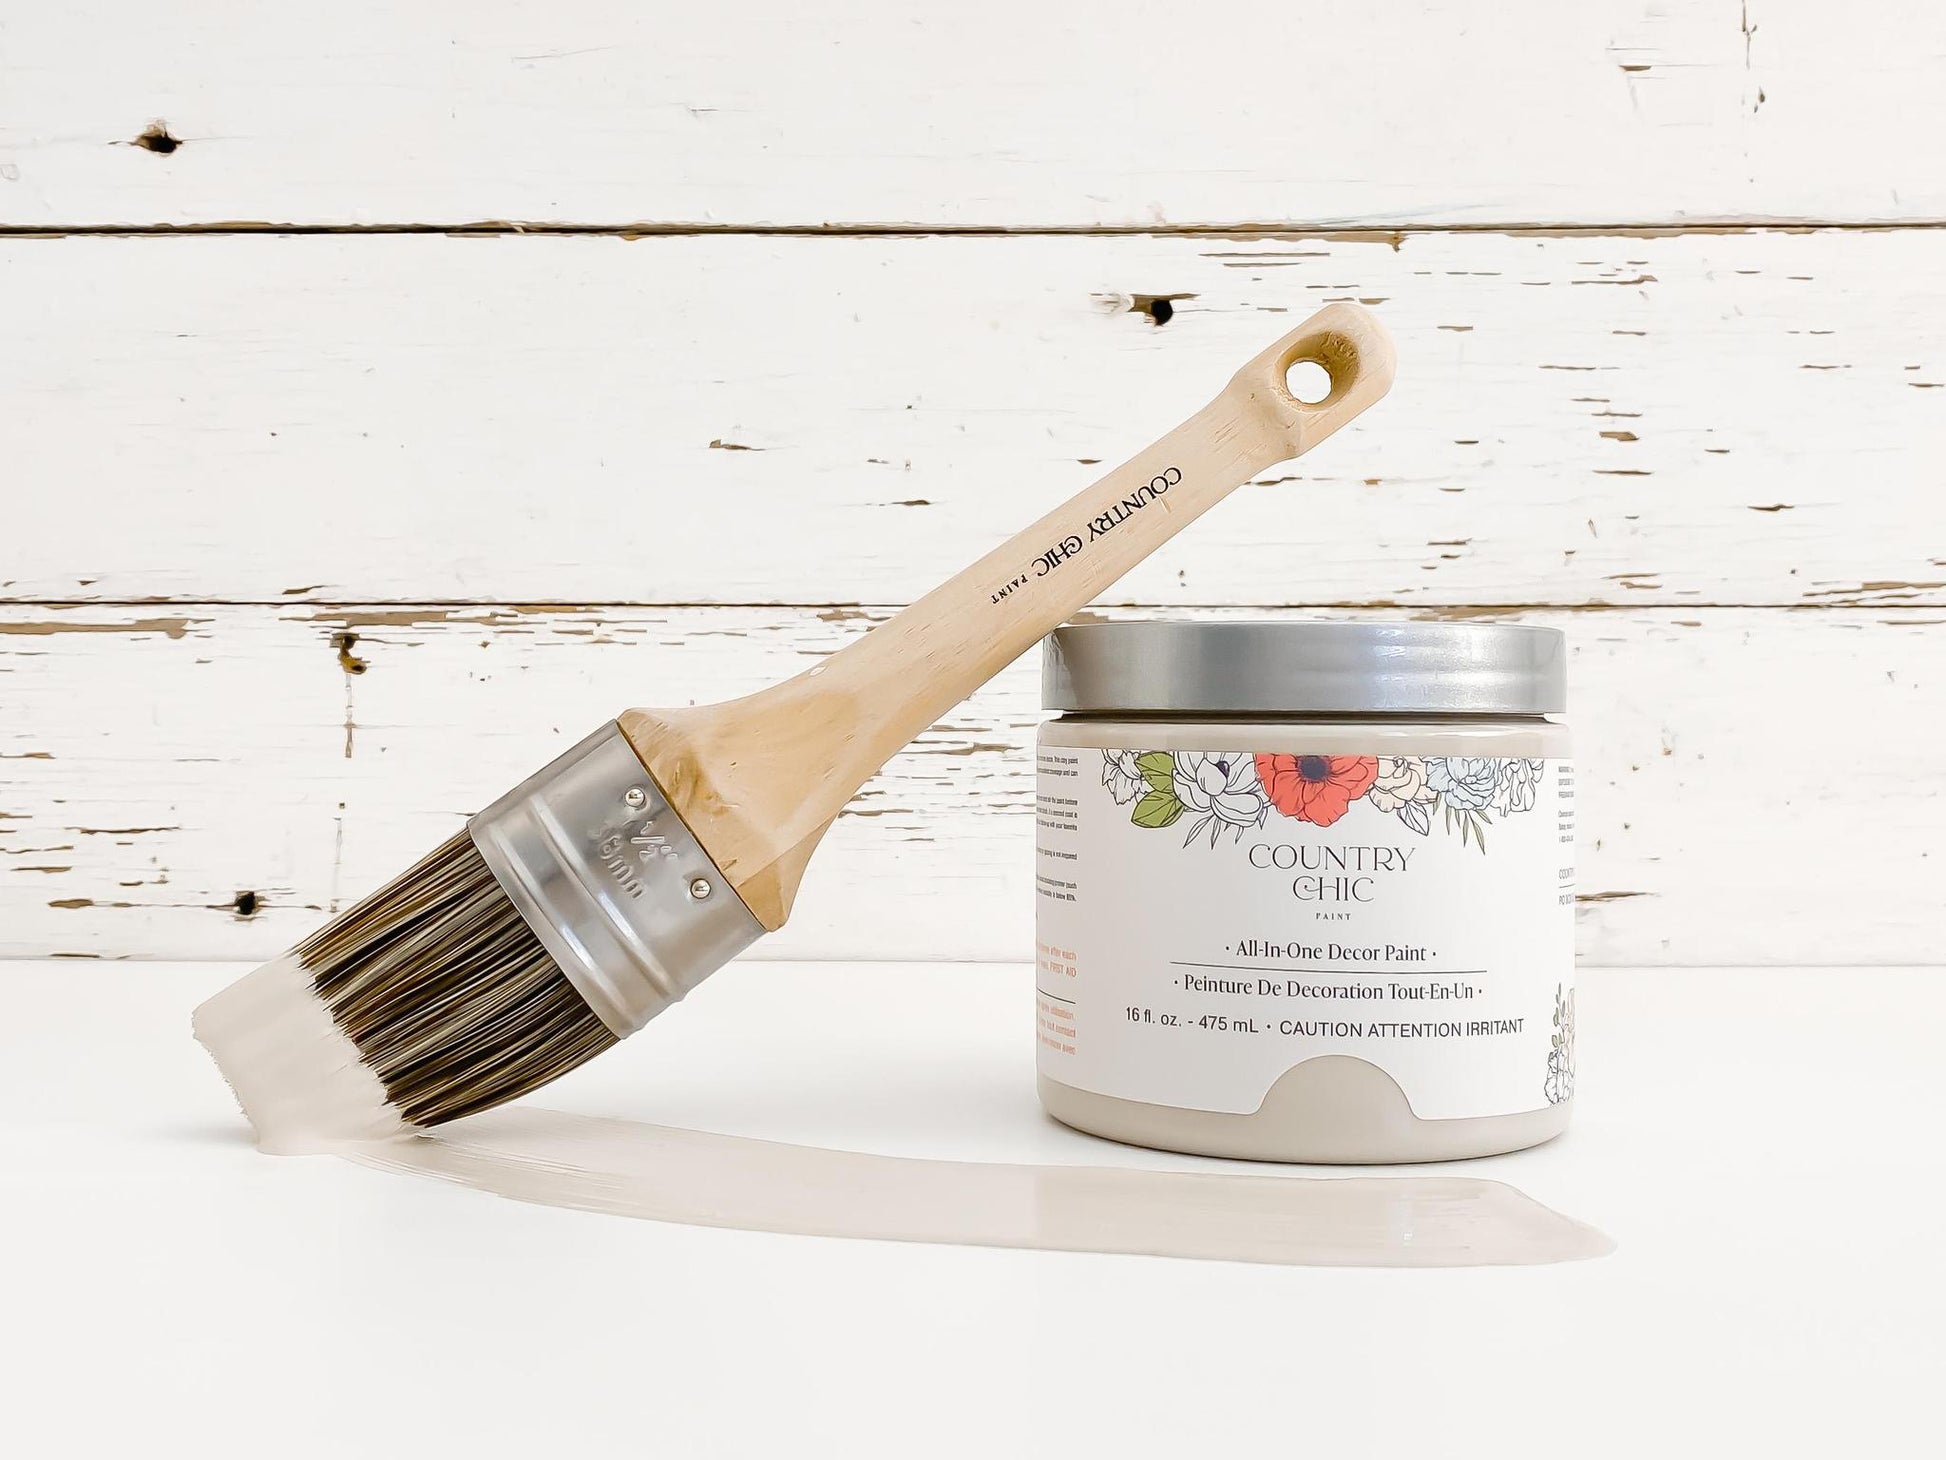 Country Chic - All in One Decor Paint - Sunday Tea